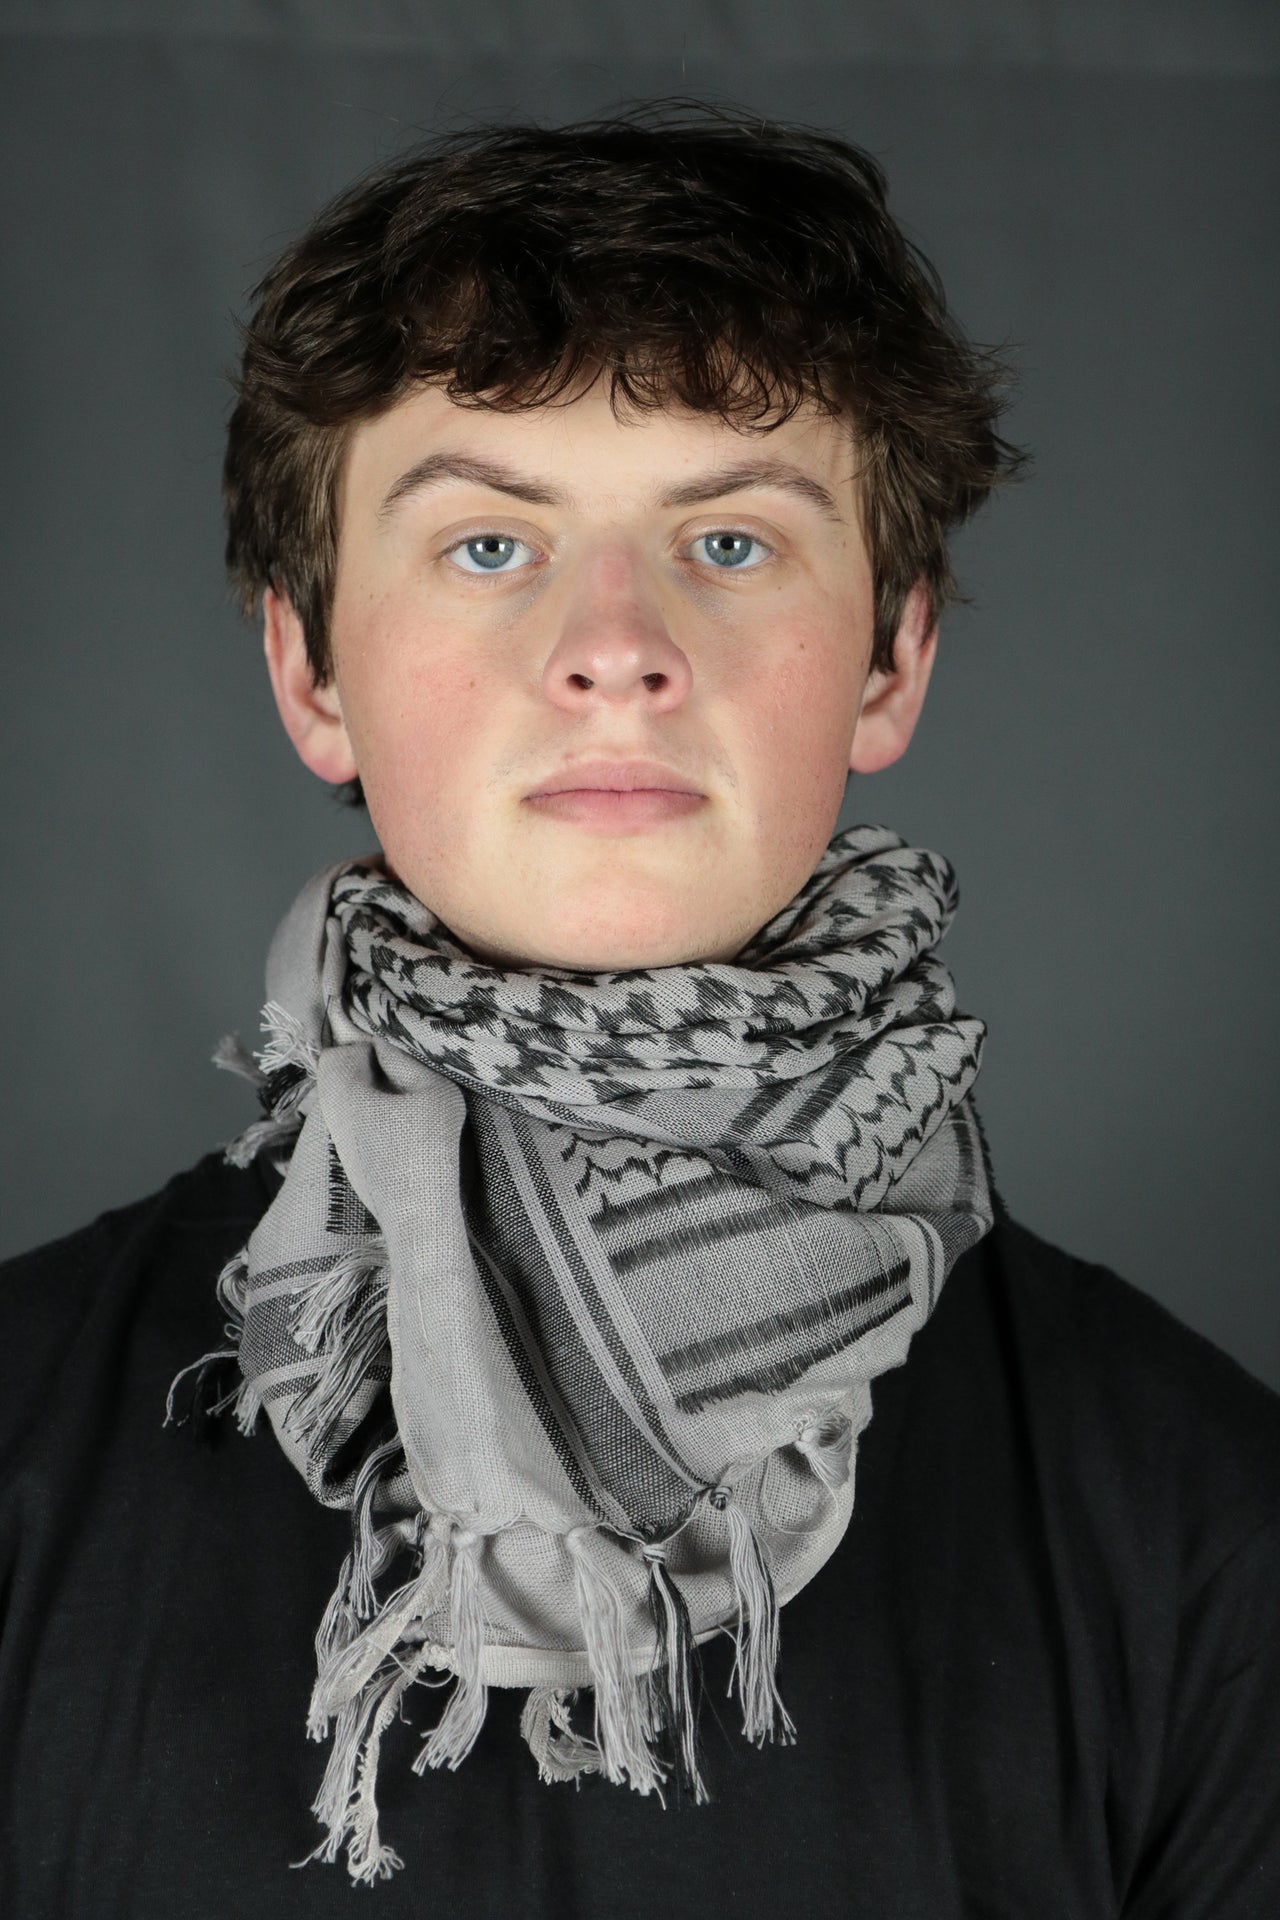 Arabic Sheik Print Shemagh Scarf | Black and Gray Face Scarf